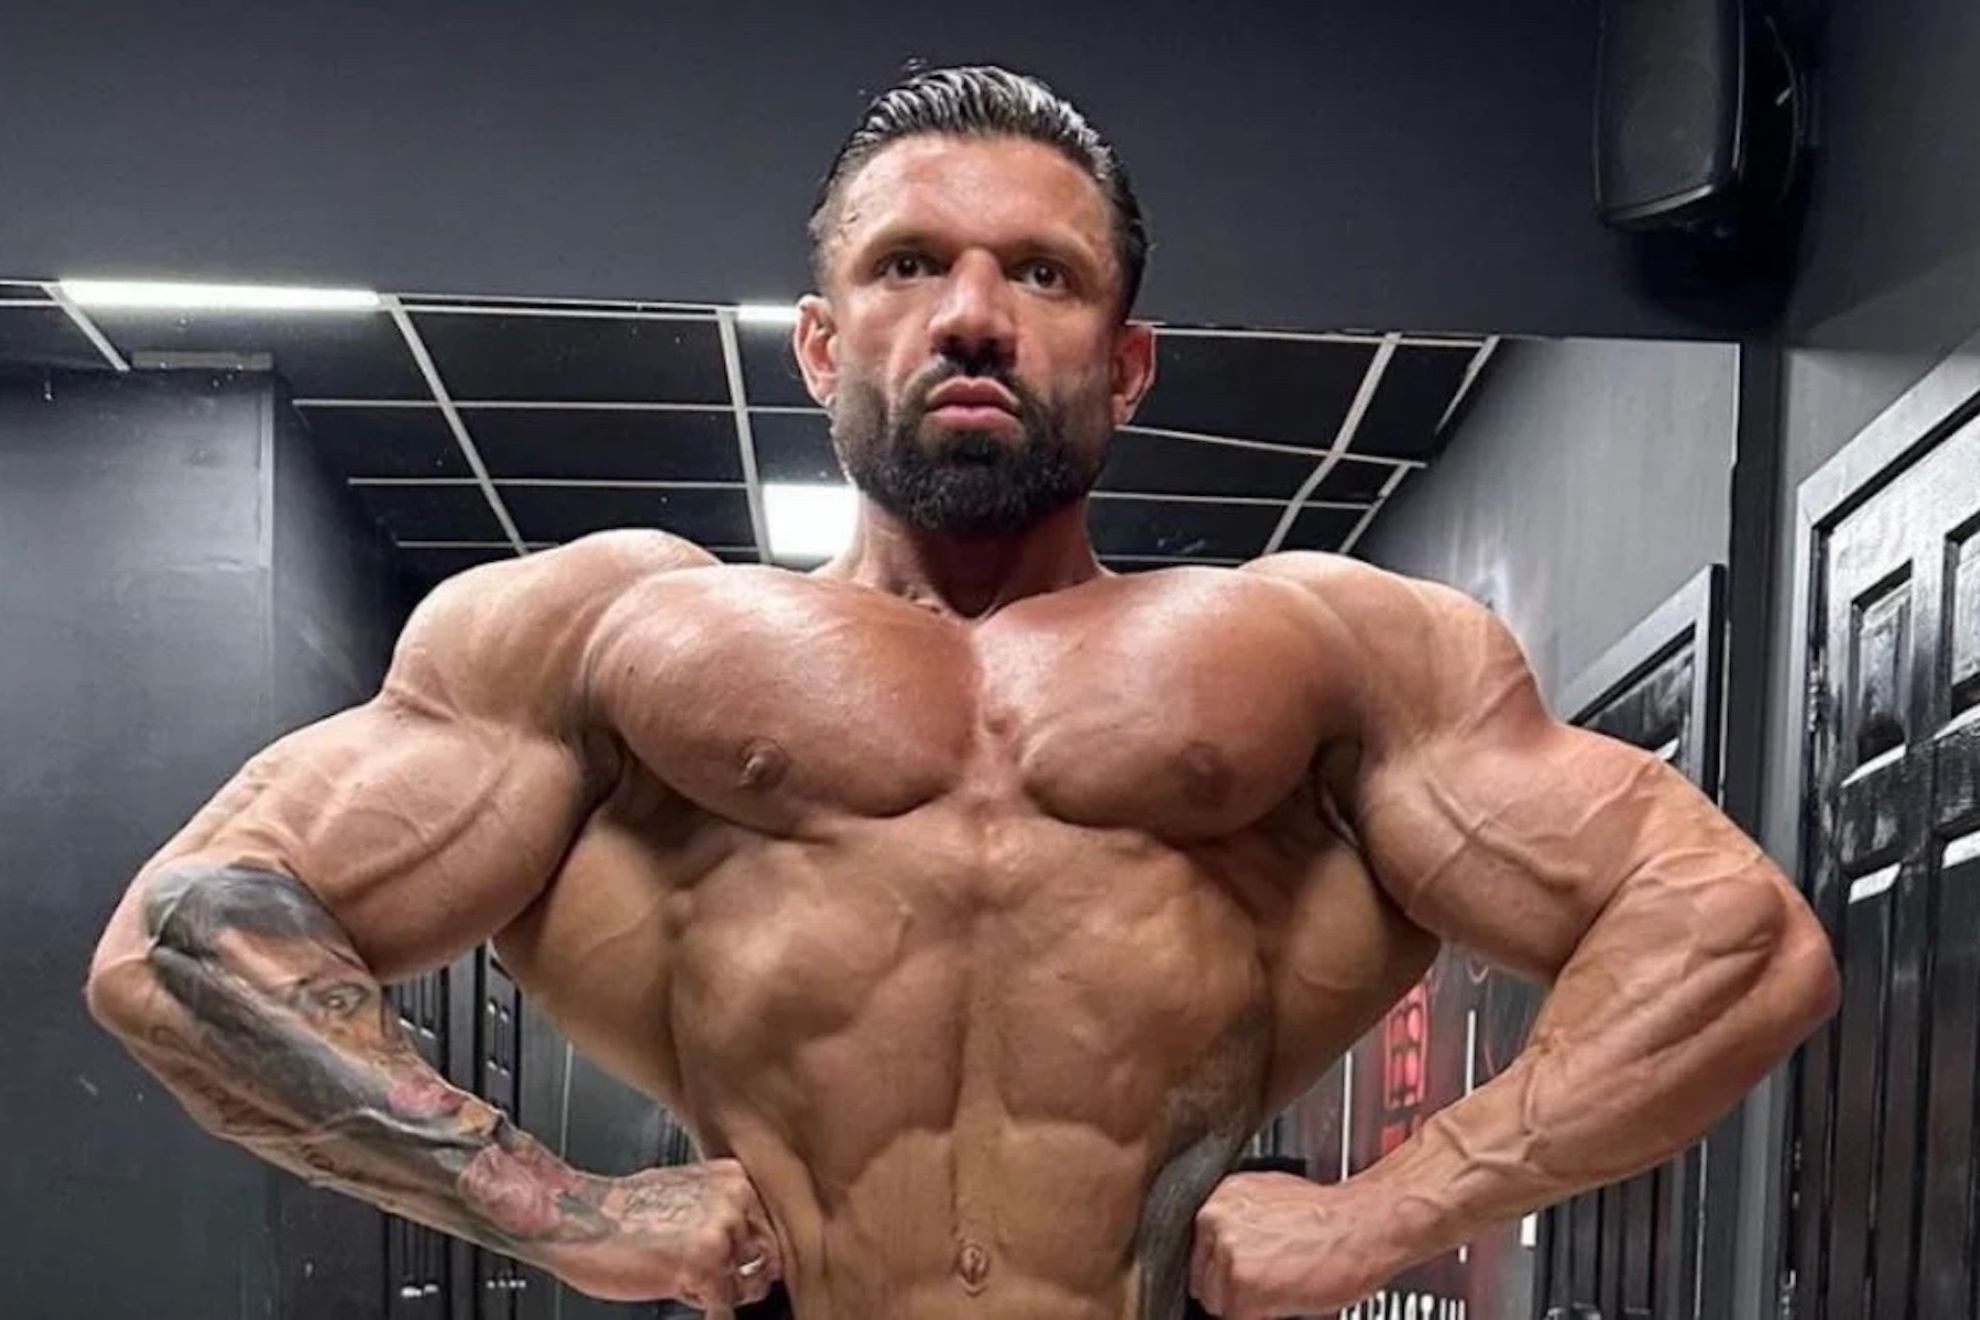 bodybuilder-neil-currey-passes-away-at-34-competed-in-2022-mr-olympia